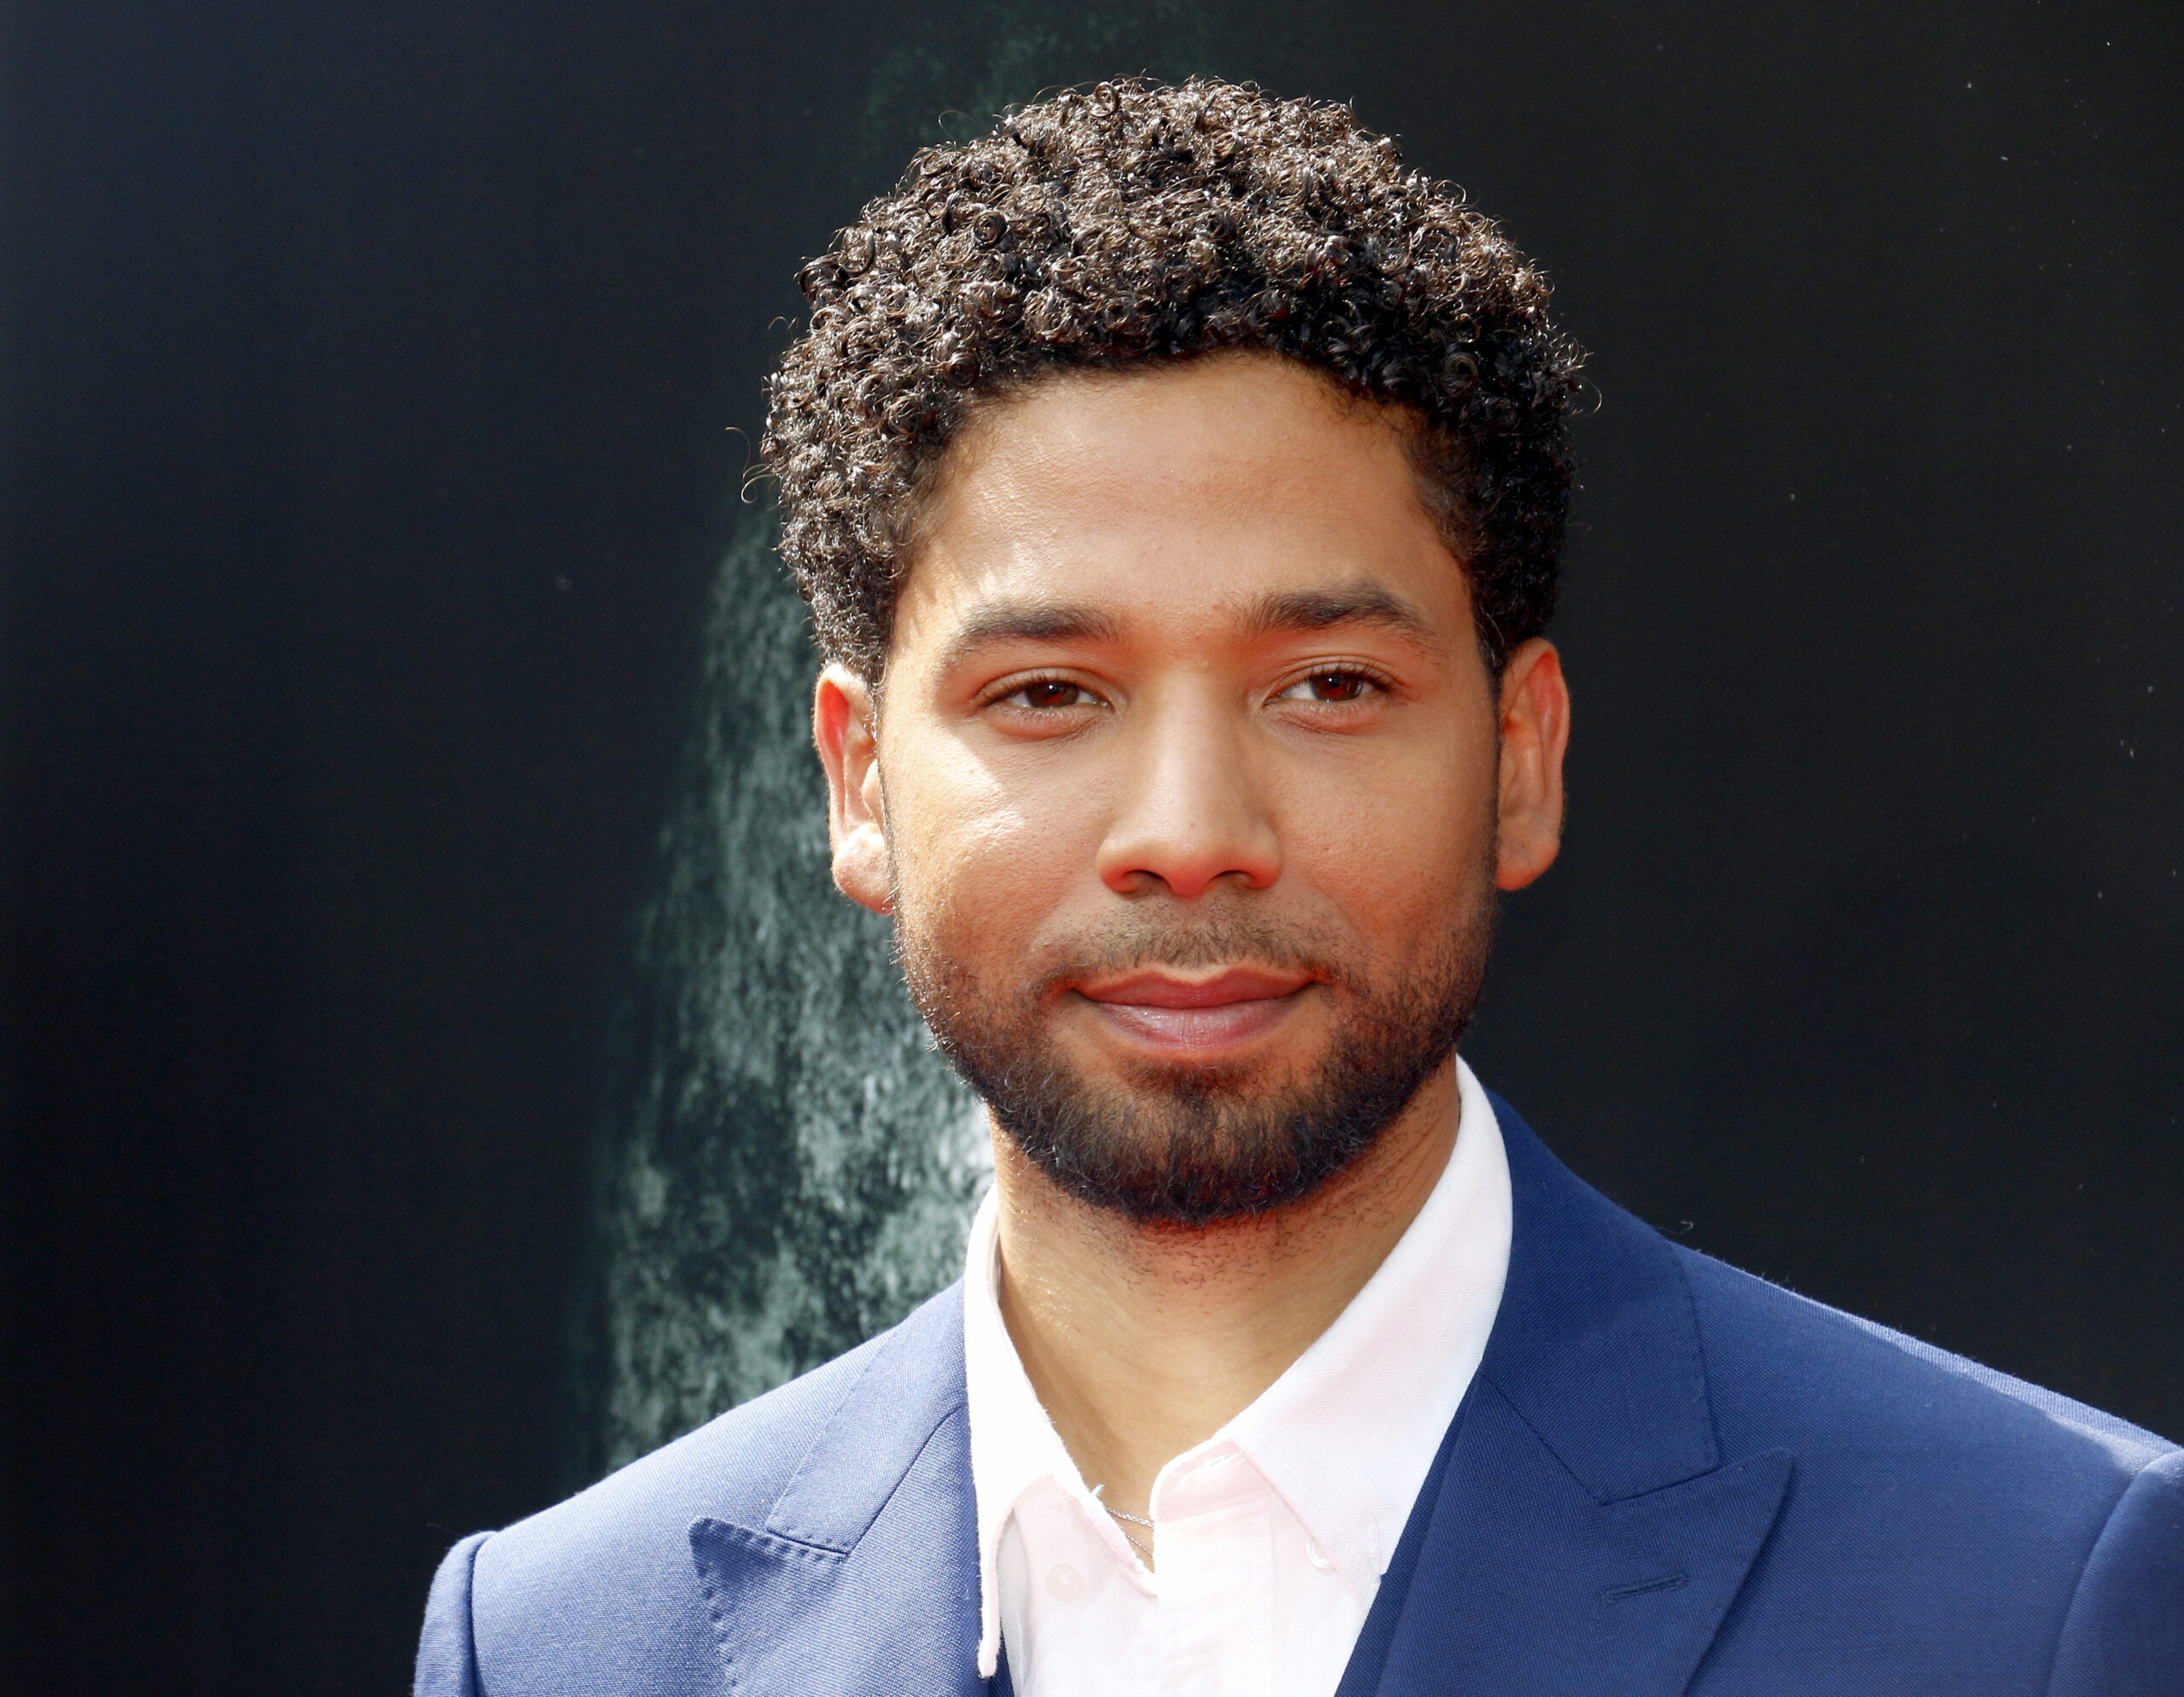 Jussie Smollett released from jail pending appeal of hate crime hoax conviction